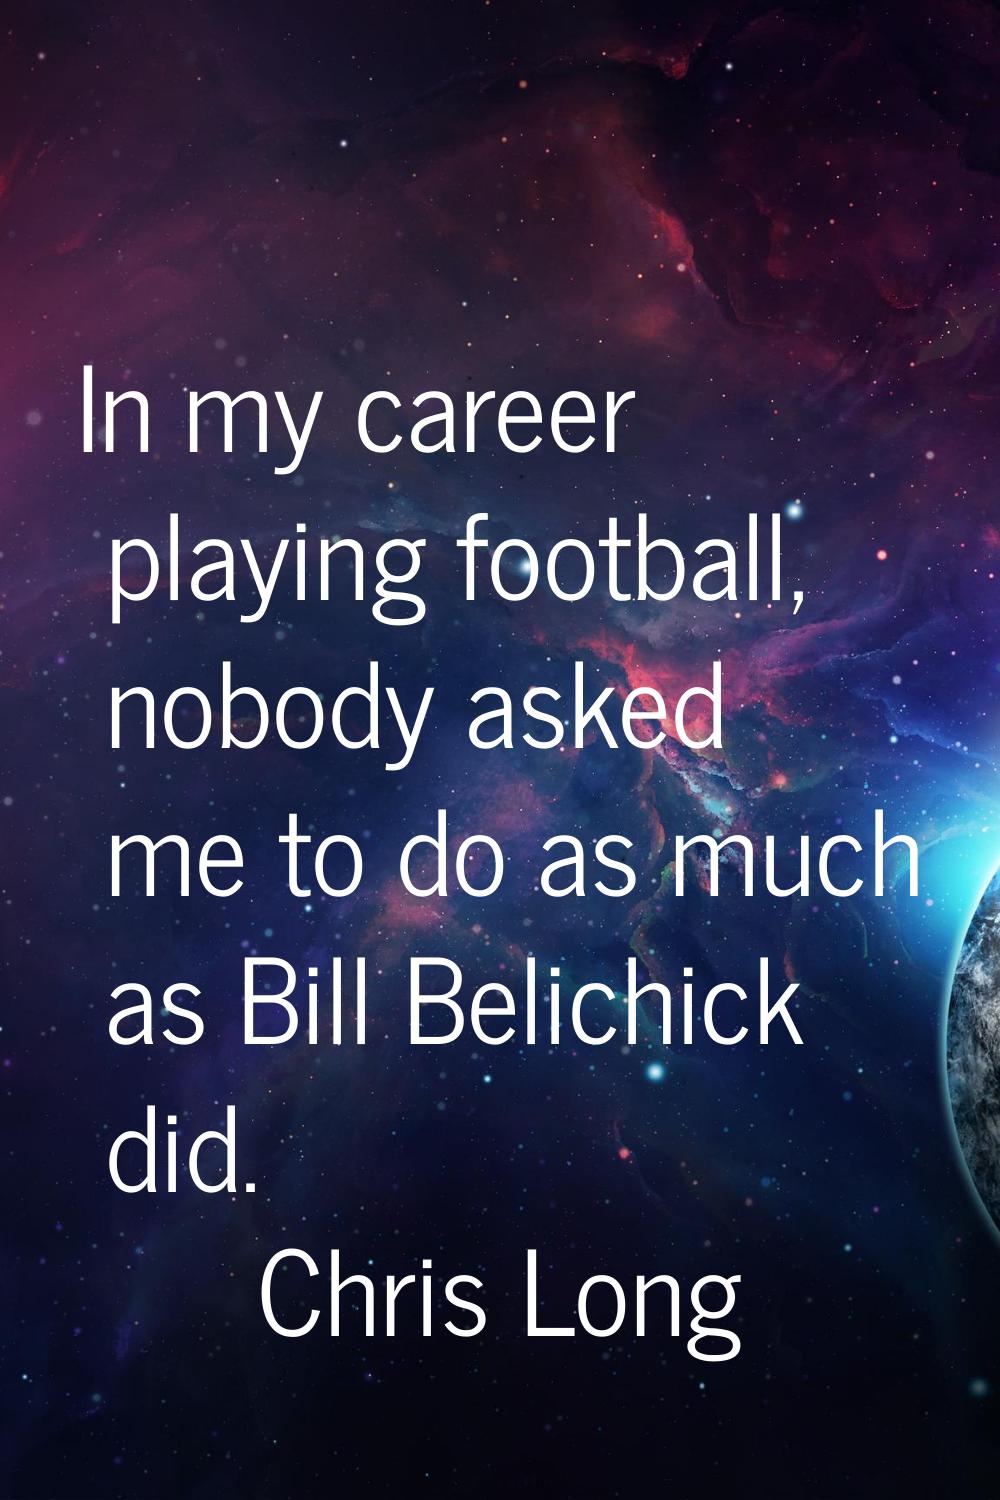 In my career playing football, nobody asked me to do as much as Bill Belichick did.